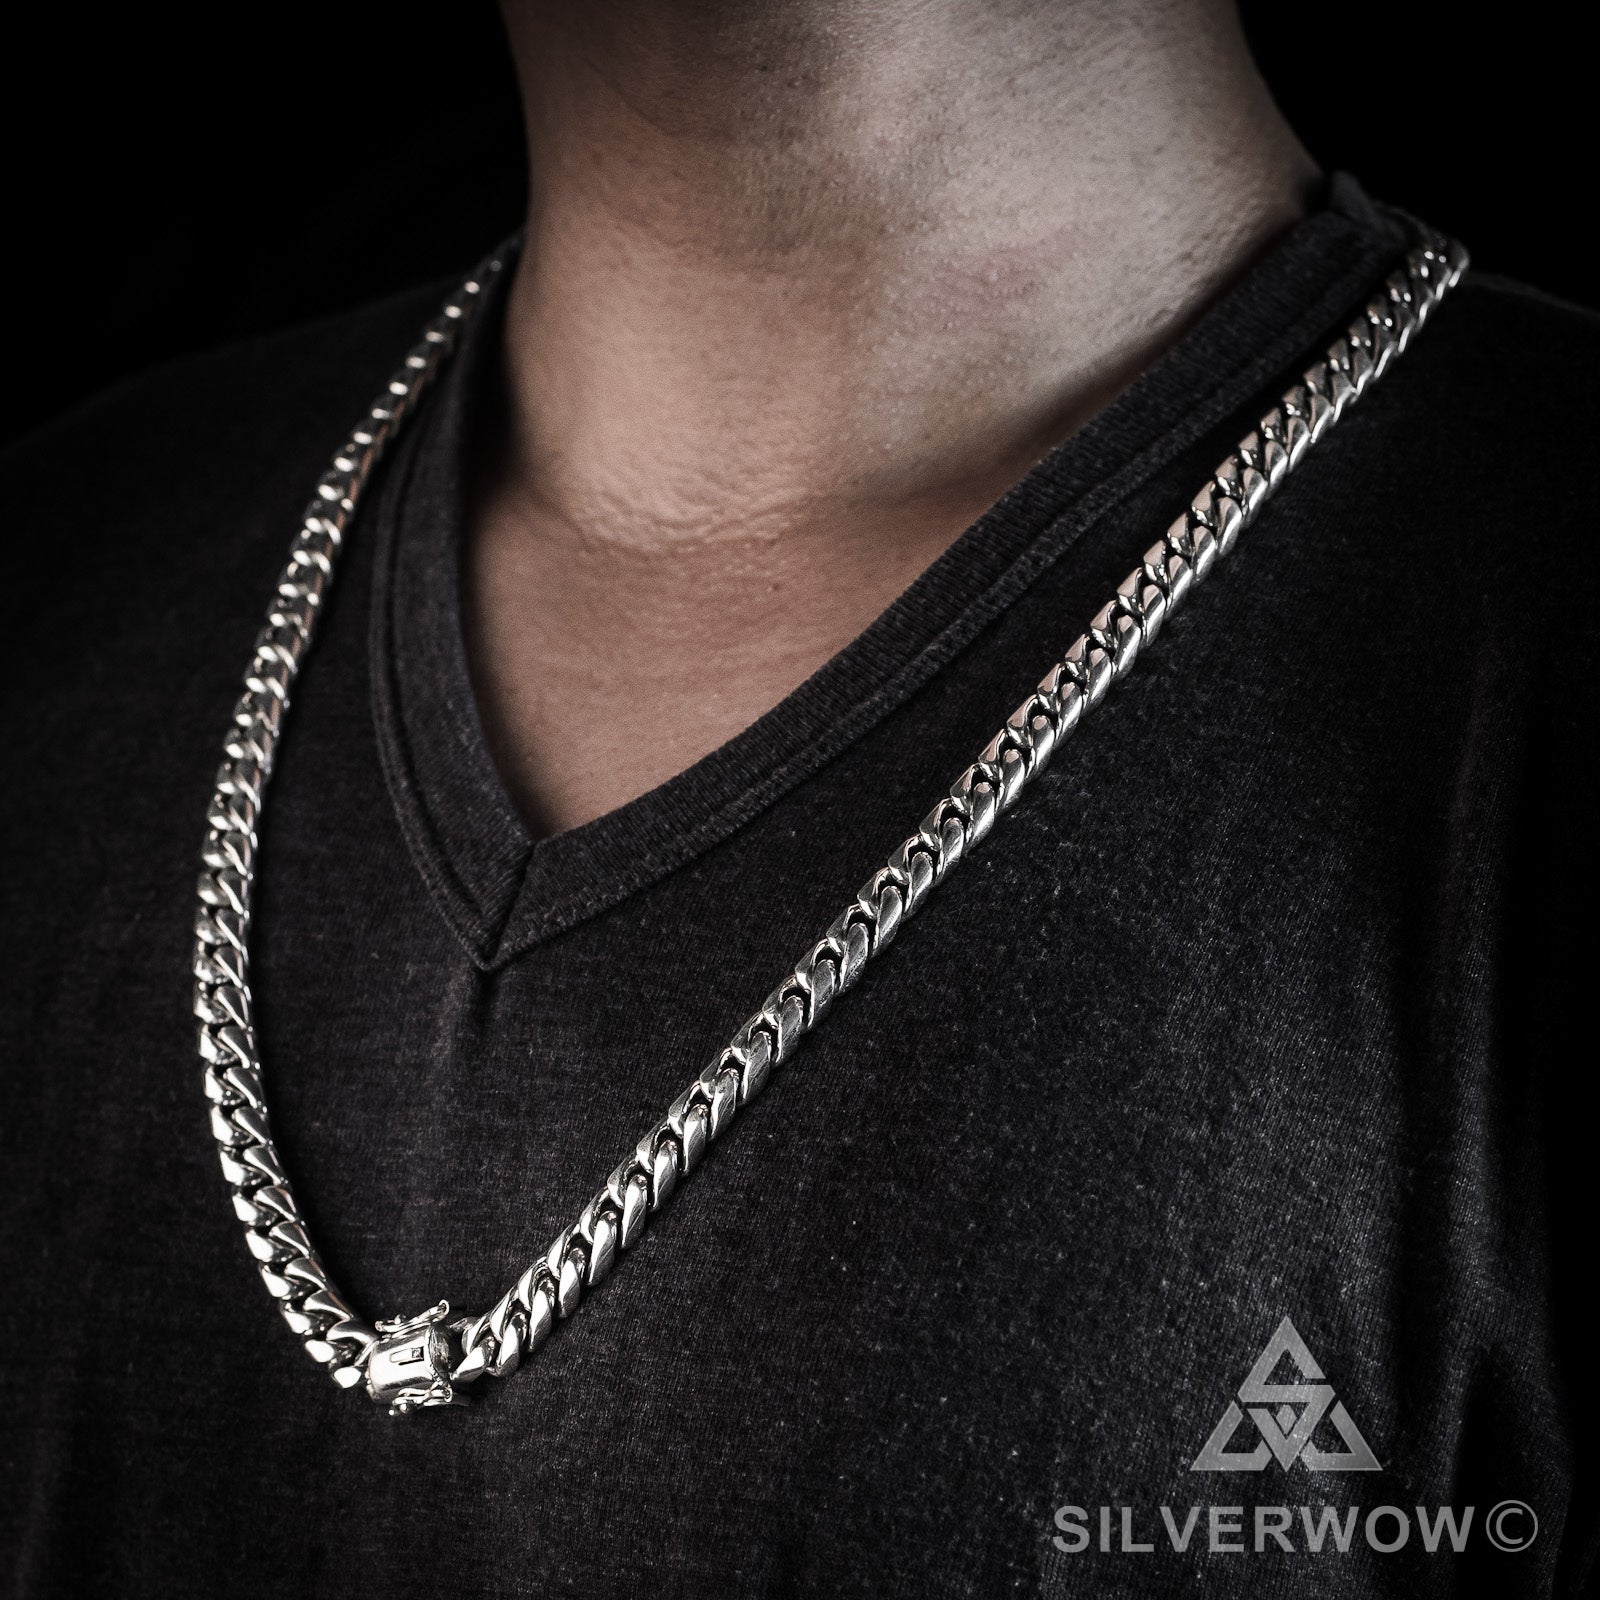 Dark Cuban Link Chain for Men (12mm) - Gifts for Him